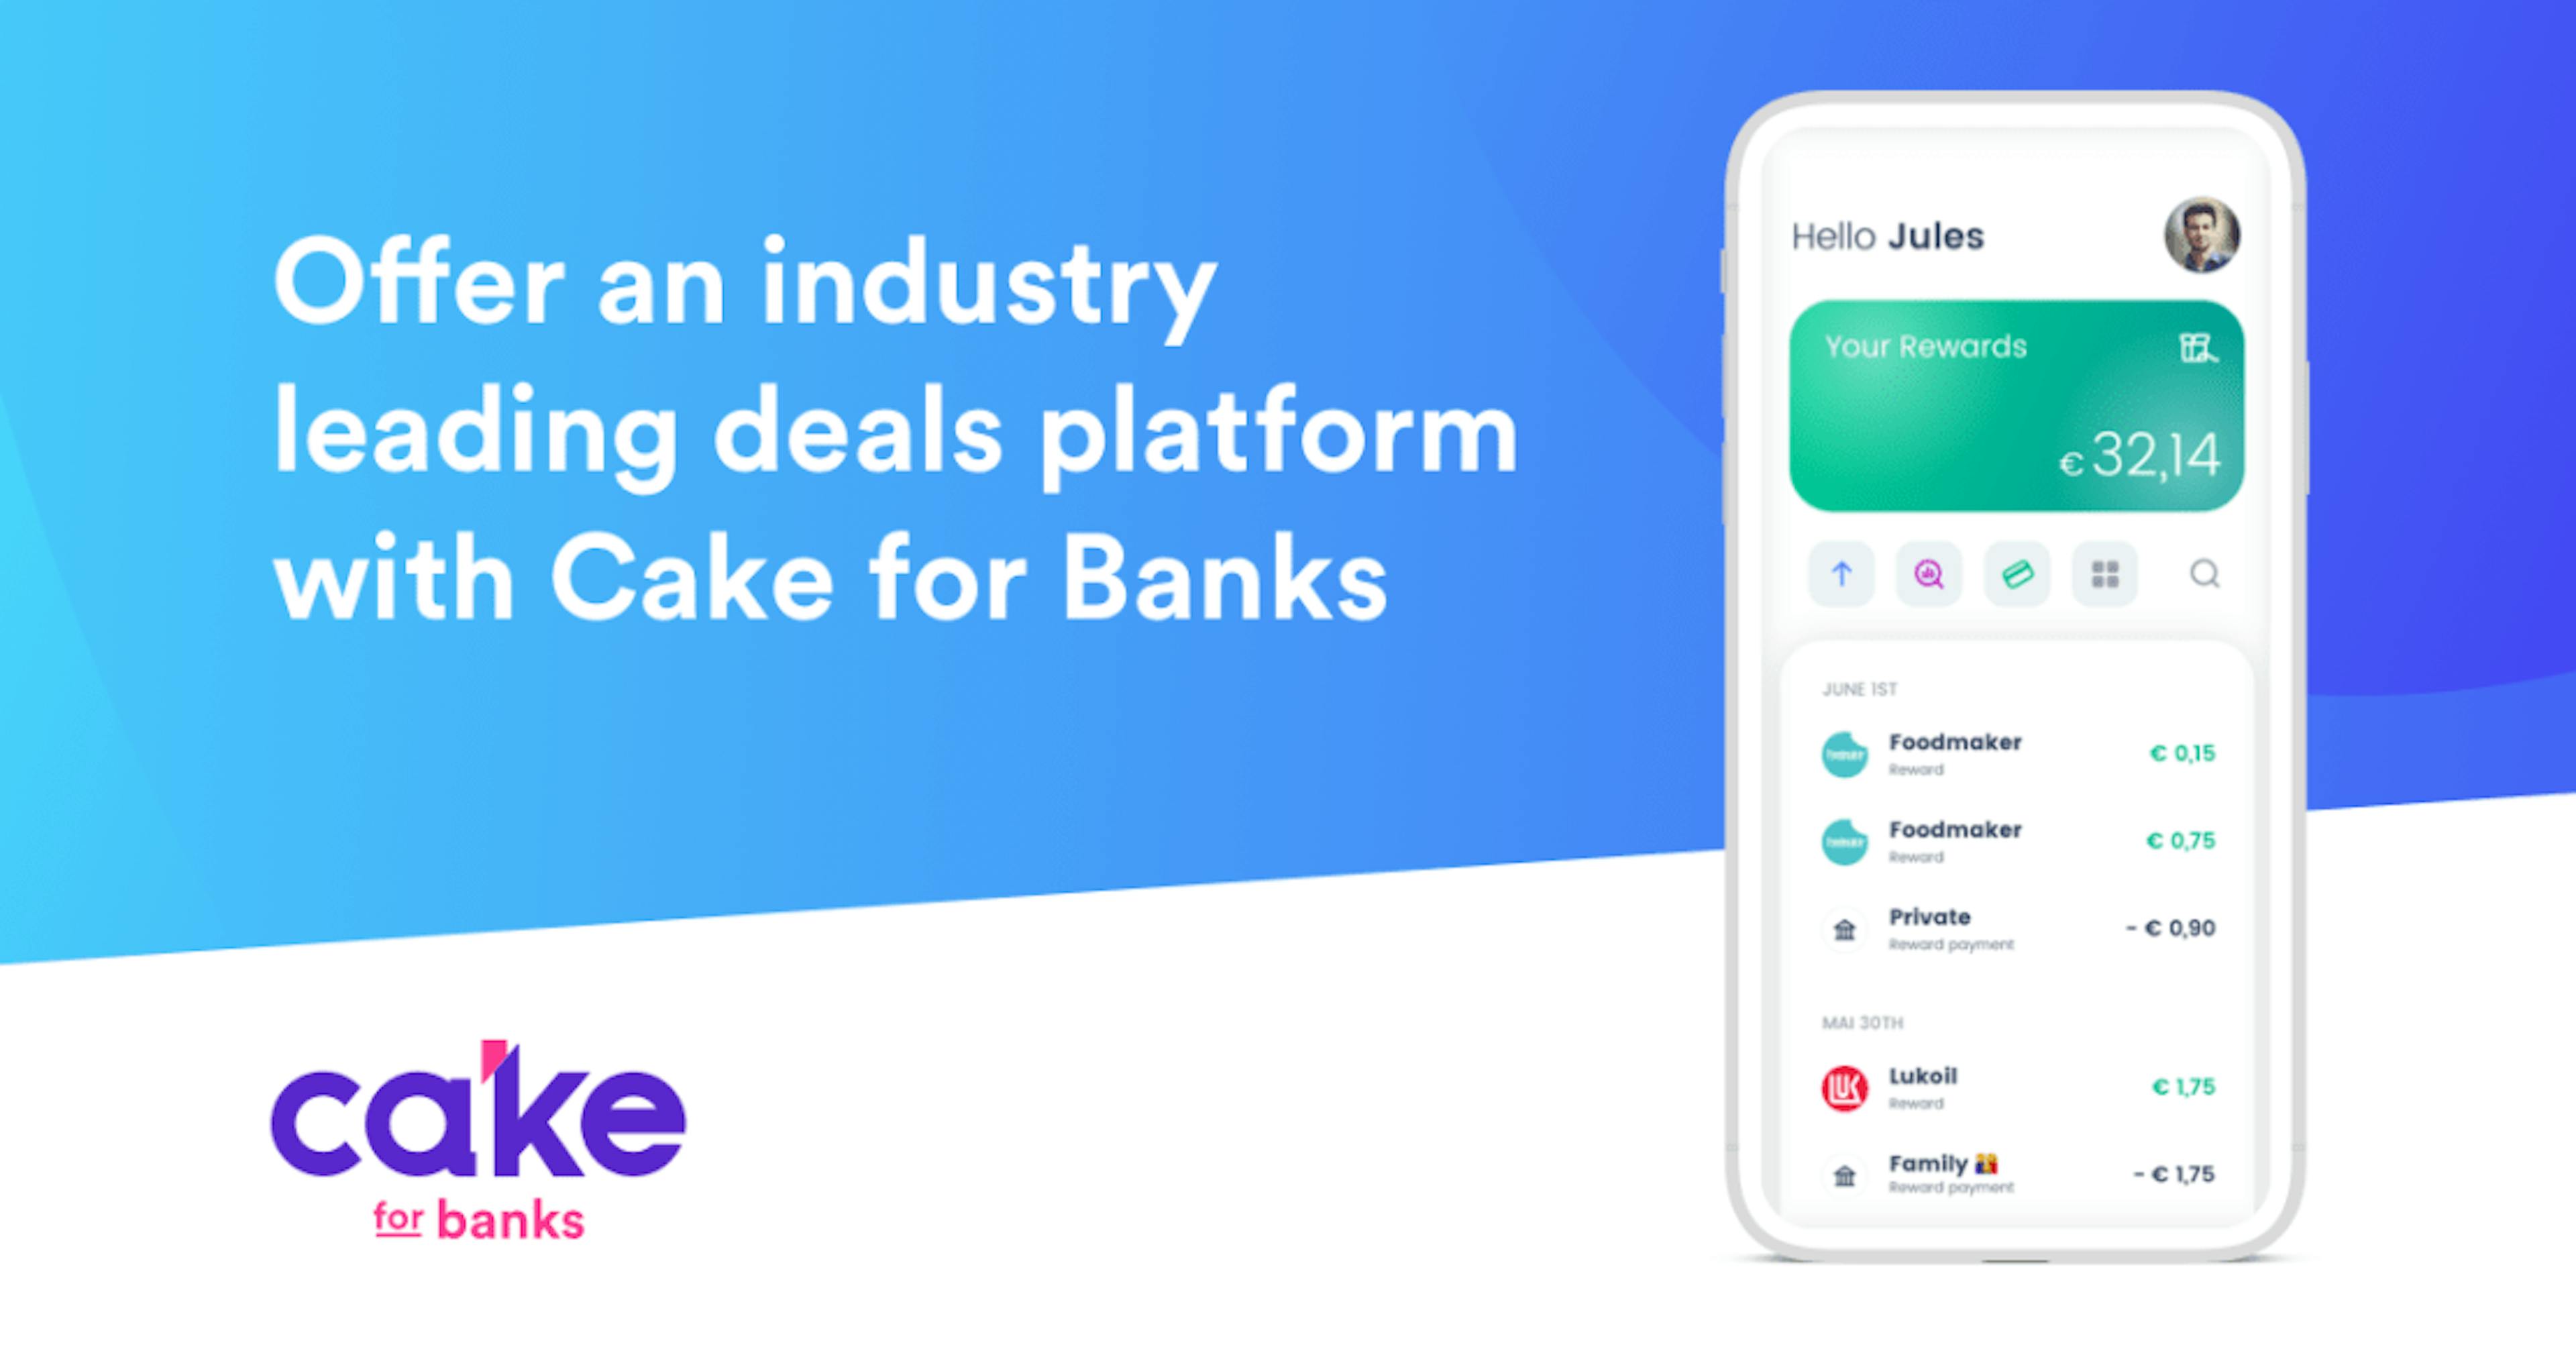 https://cake.app/cake-culture/tell-us-about-cake-for-banks/